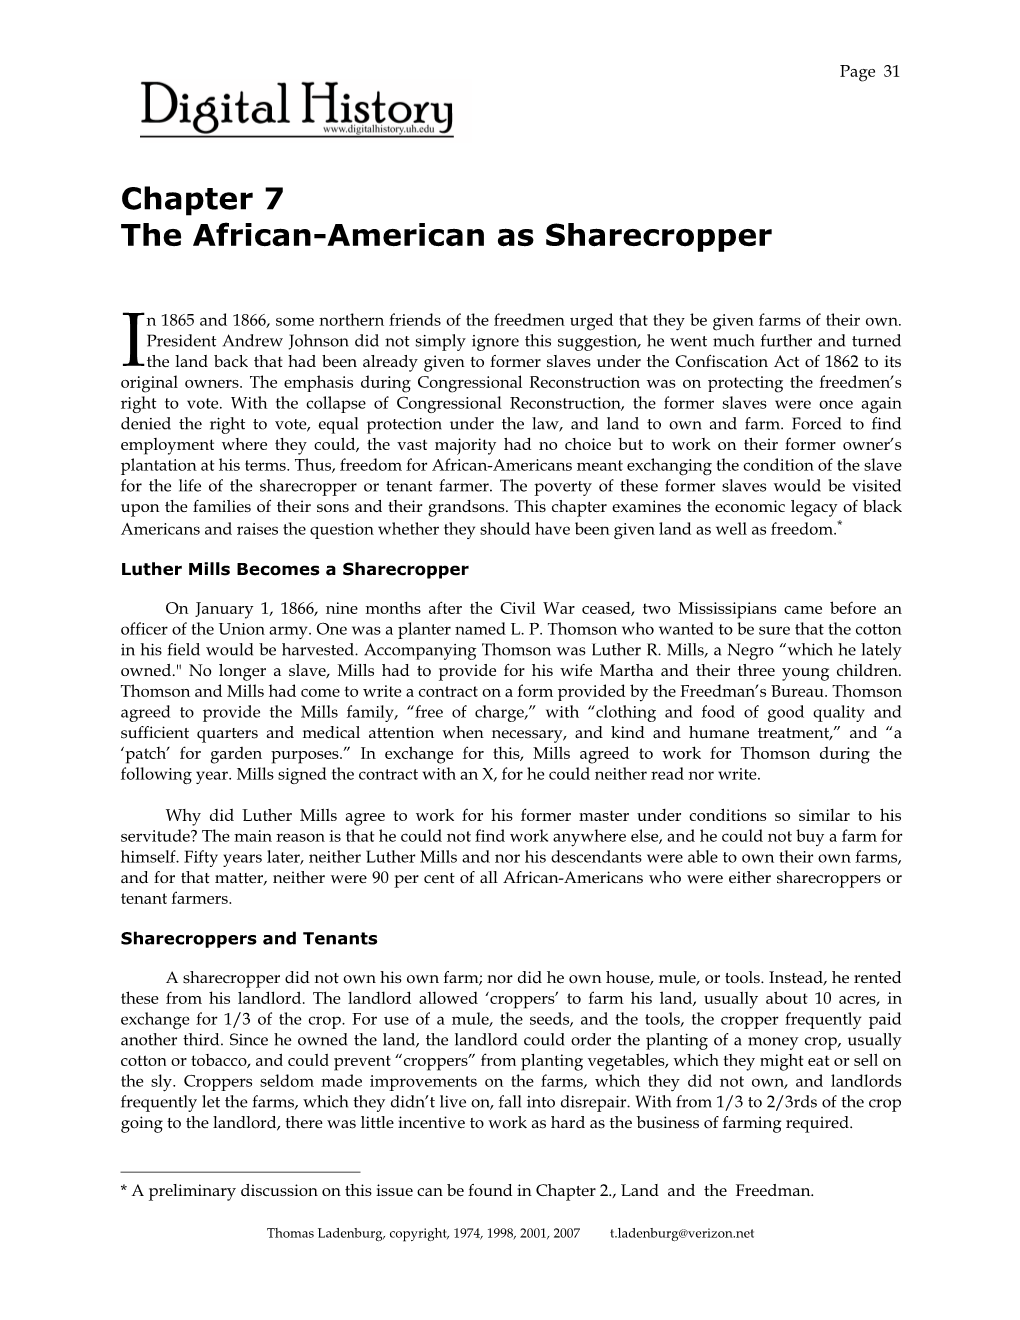 Chapter 7 the African-American As Sharecropper